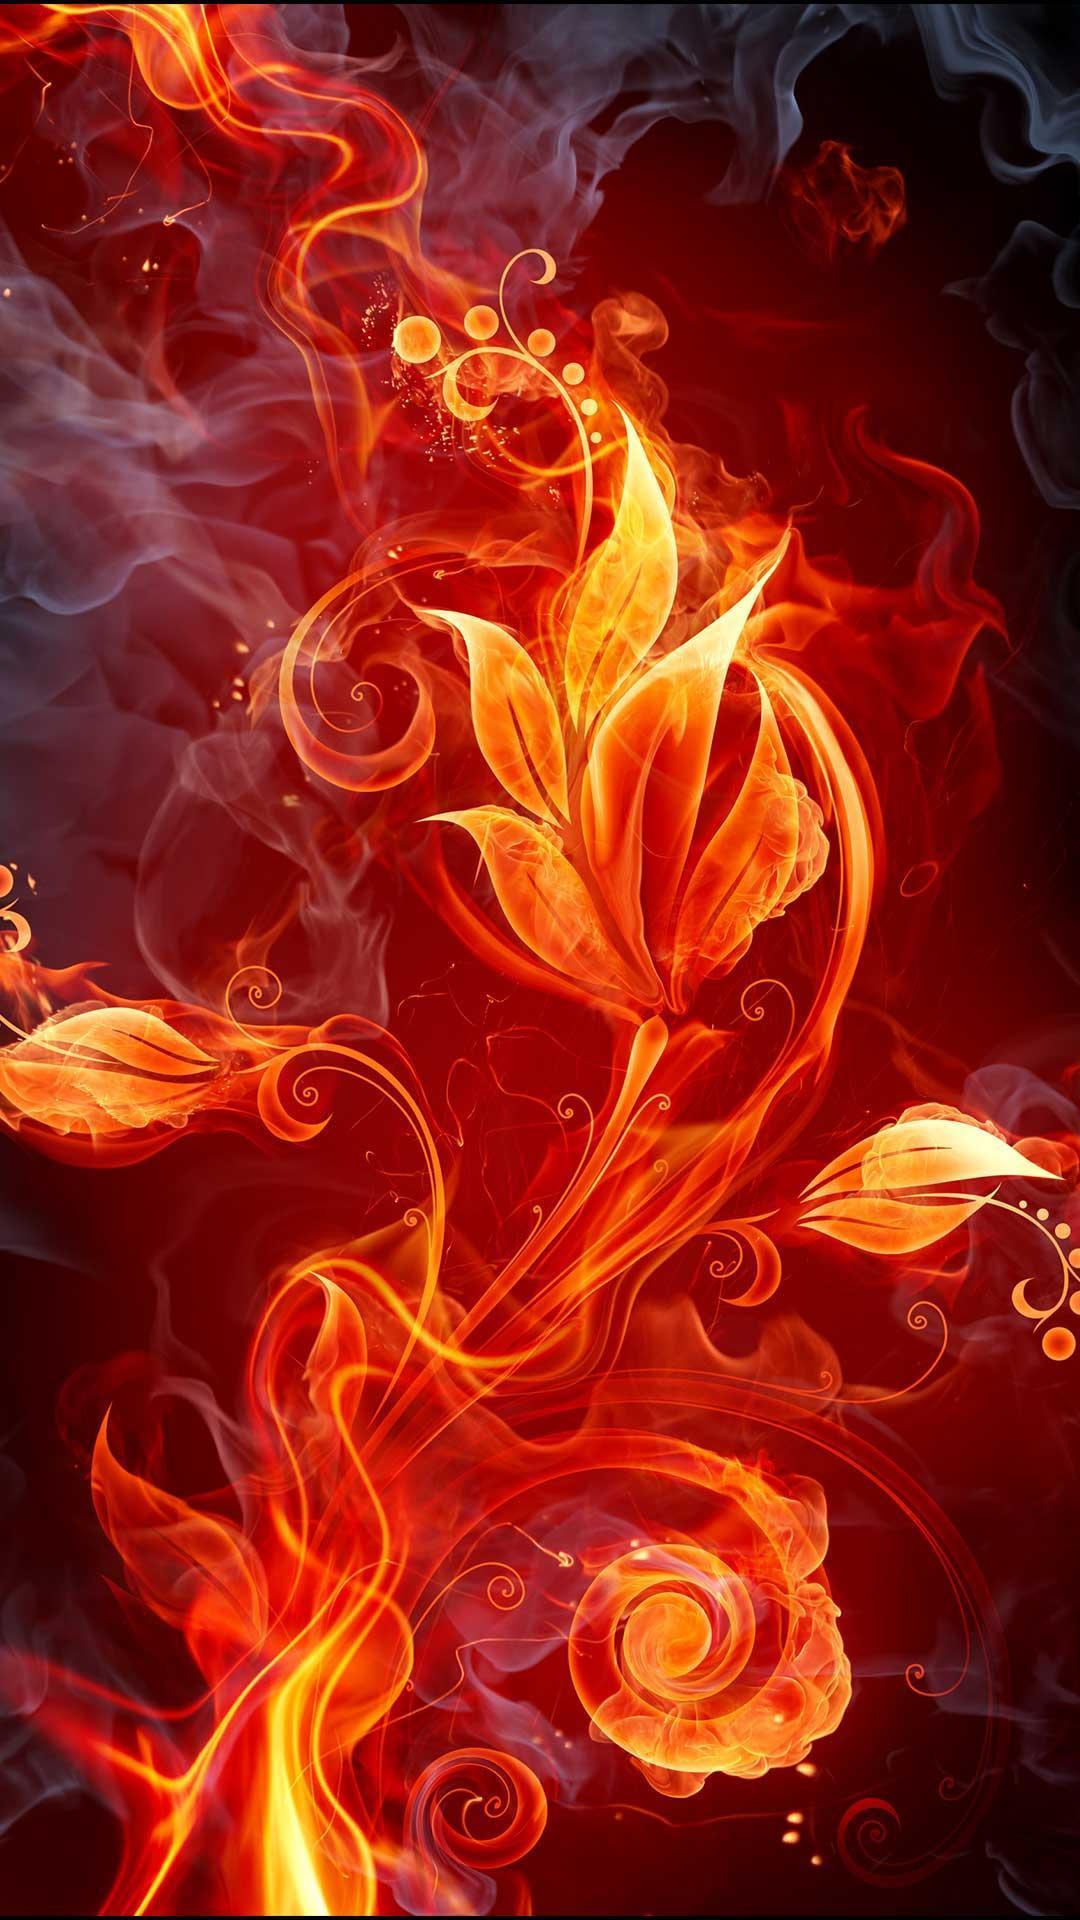 Fire Flower Wallpaper For SMS for Android